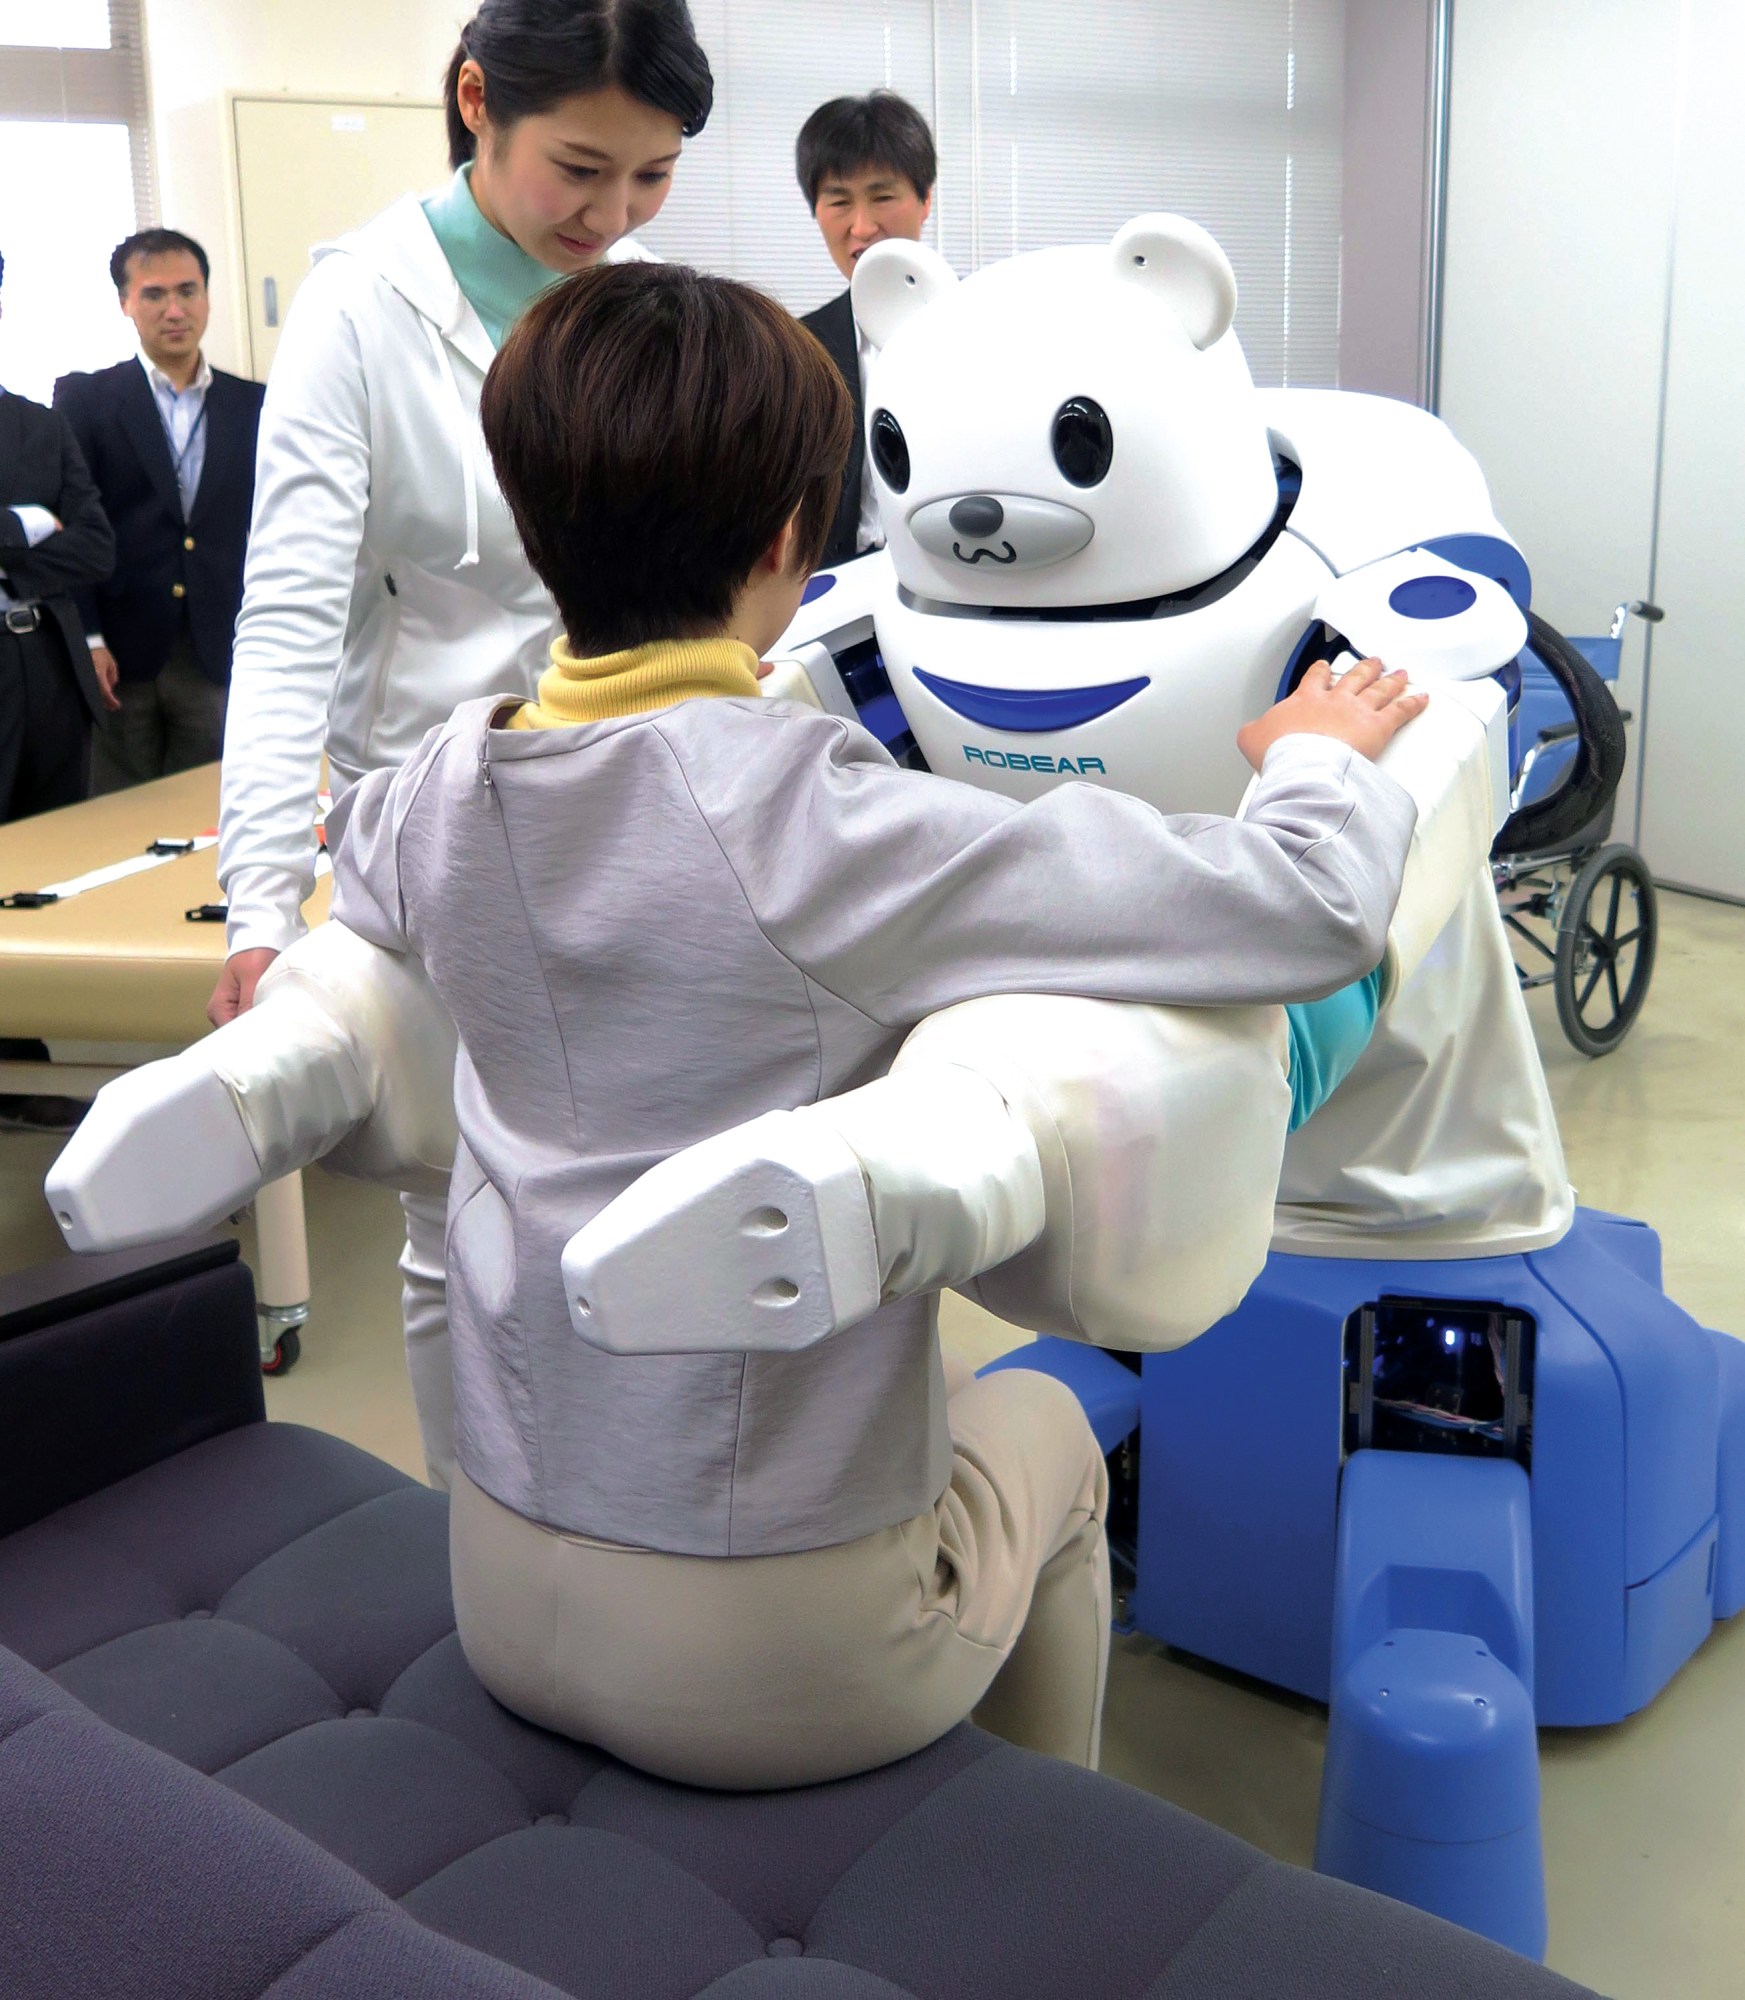 Inside Japan’s lengthy experiment in automating eldercare